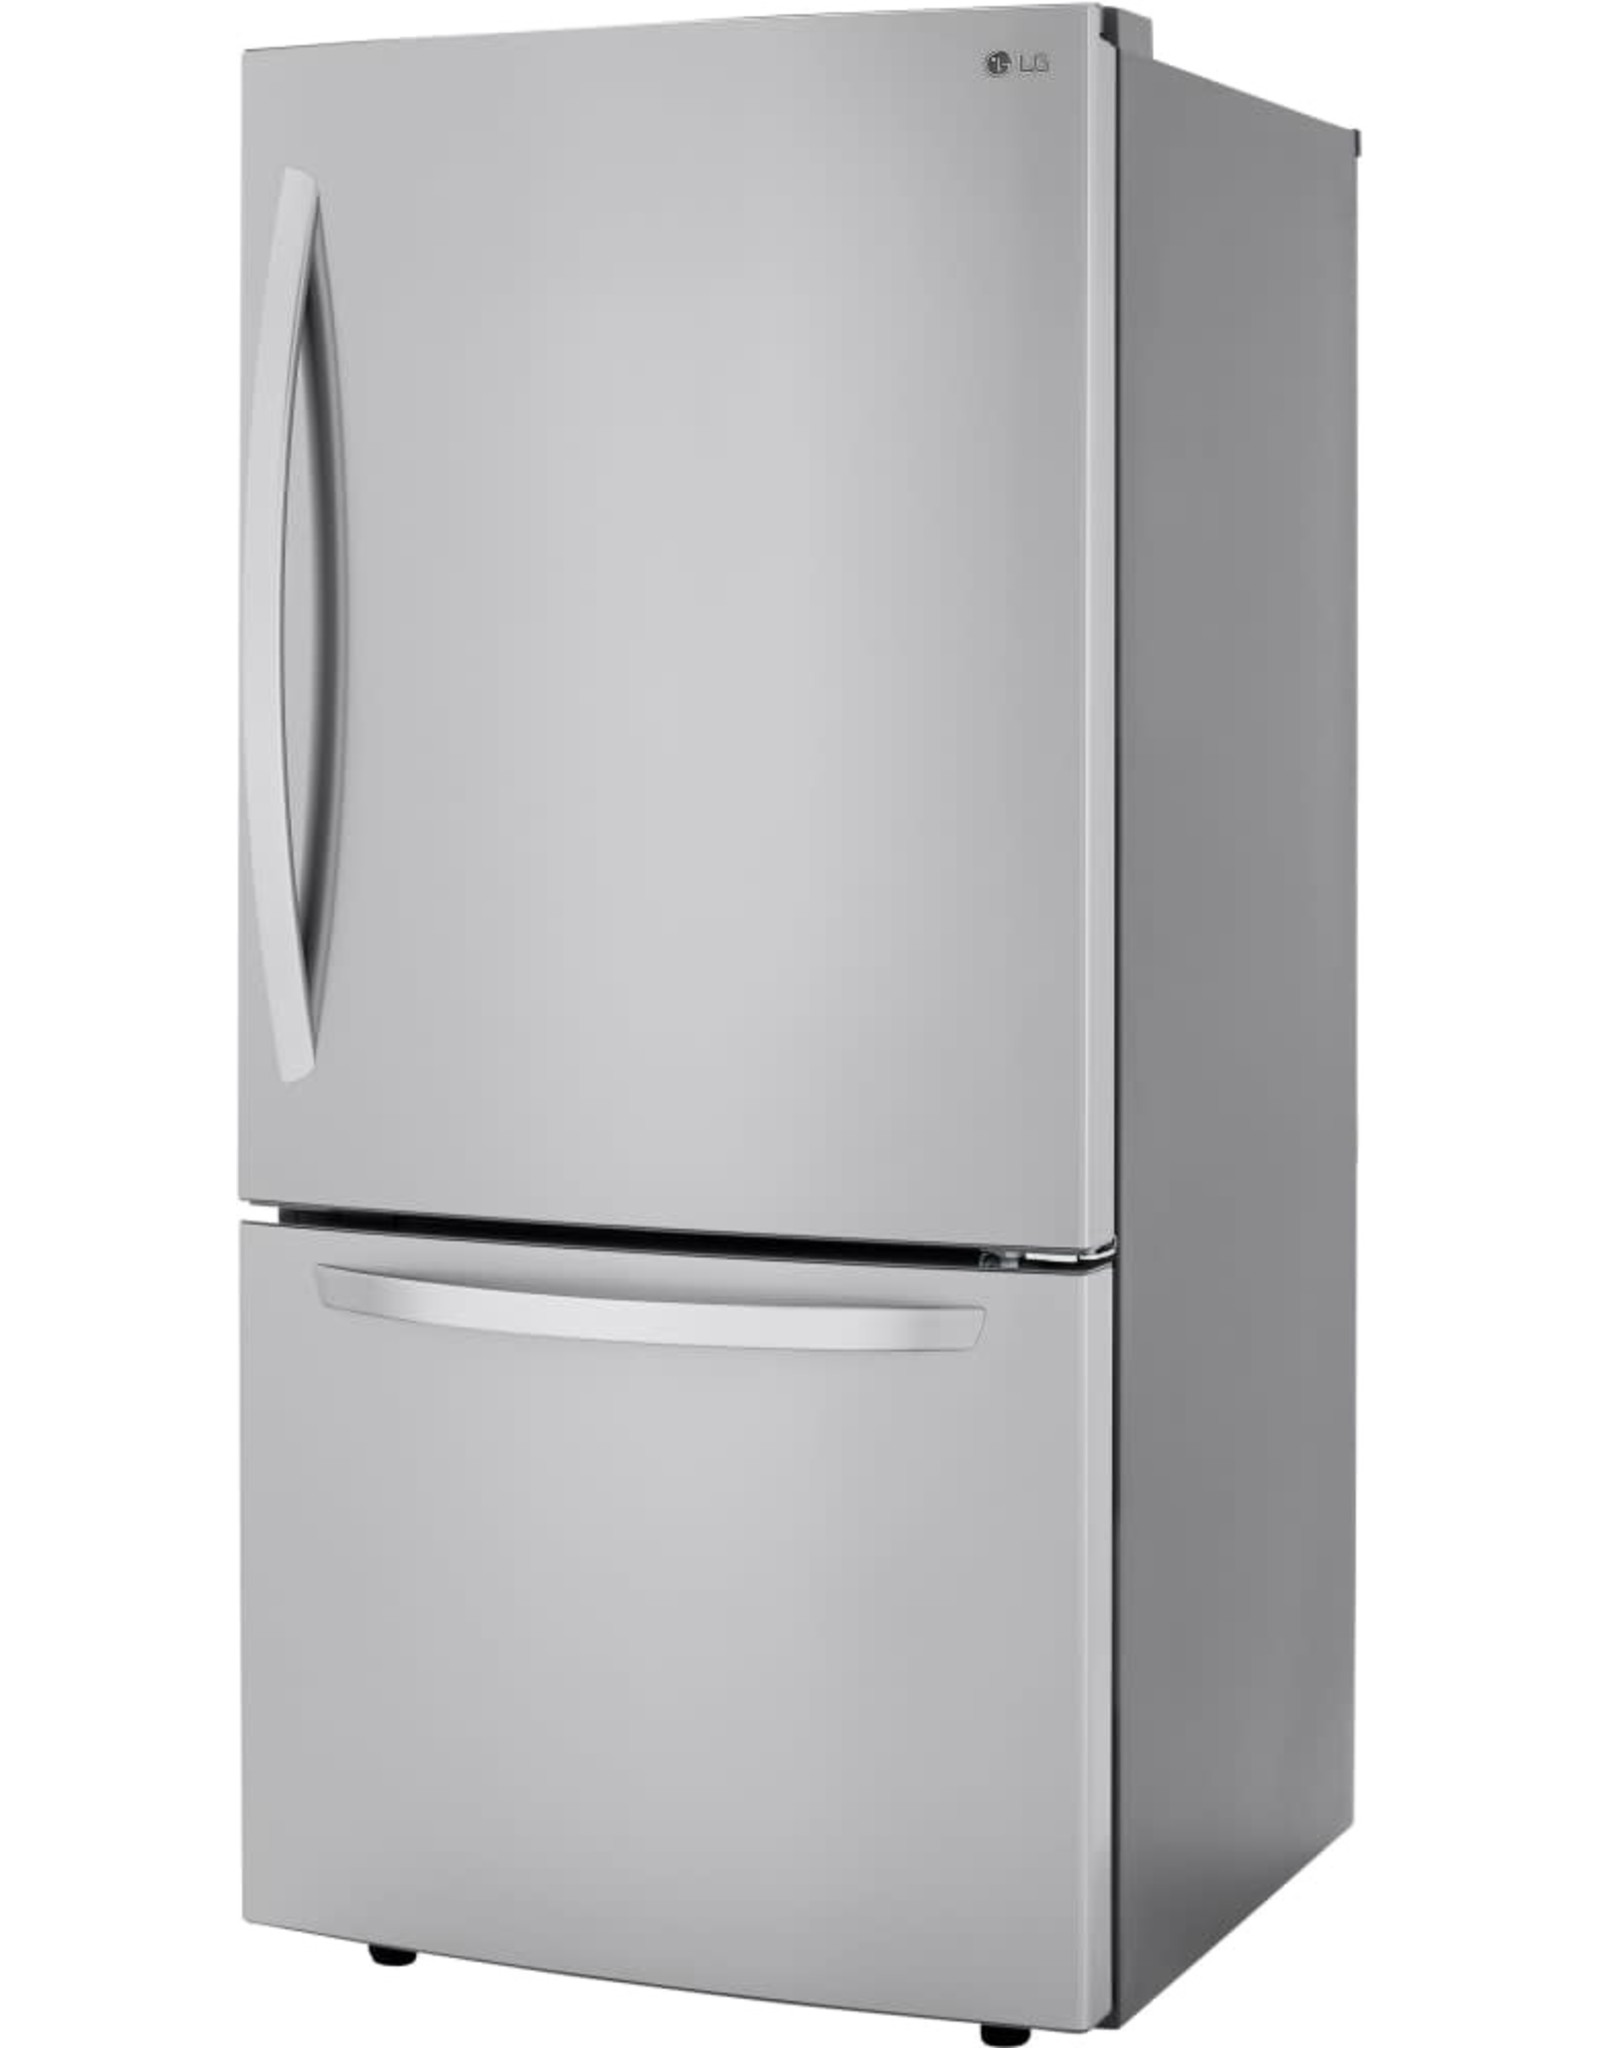 LG Electronics LRDCS2603S 25.50 cu. ft. Bottom Freezer Refrigerator in PrintProof Stainless Steel with Filtered Ice